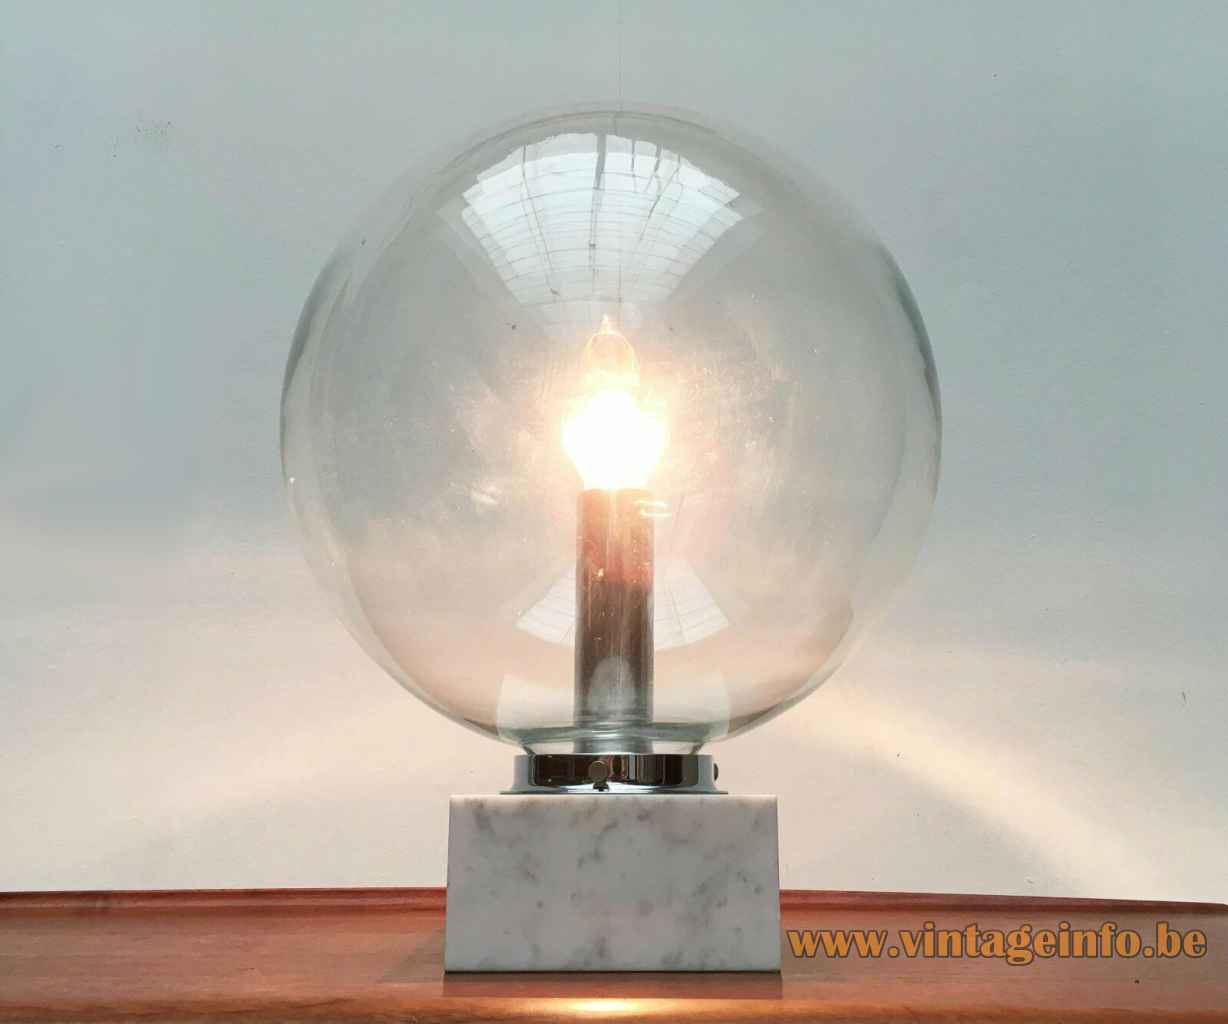 ERCO globe table lamp 3480 square marble base clear glass lampshade chrome tube 1970s Germany